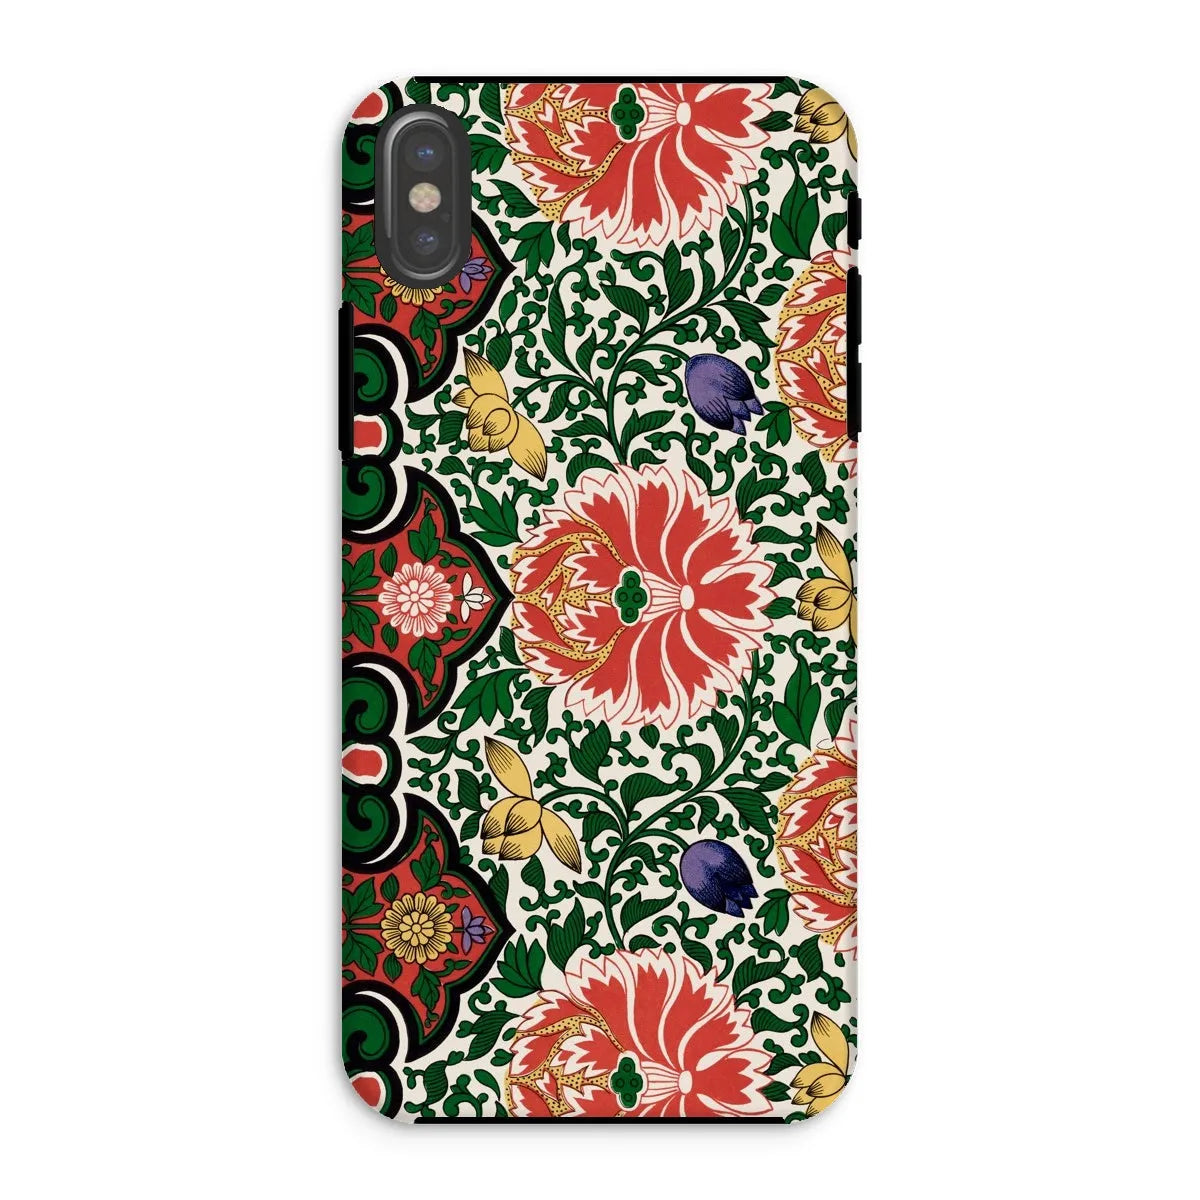 Chinese Floral Pattern Aesthetic Art Phone Case - Owen Jones - Iphone Xs / Matte - Mobile Phone Cases - Aesthetic Art